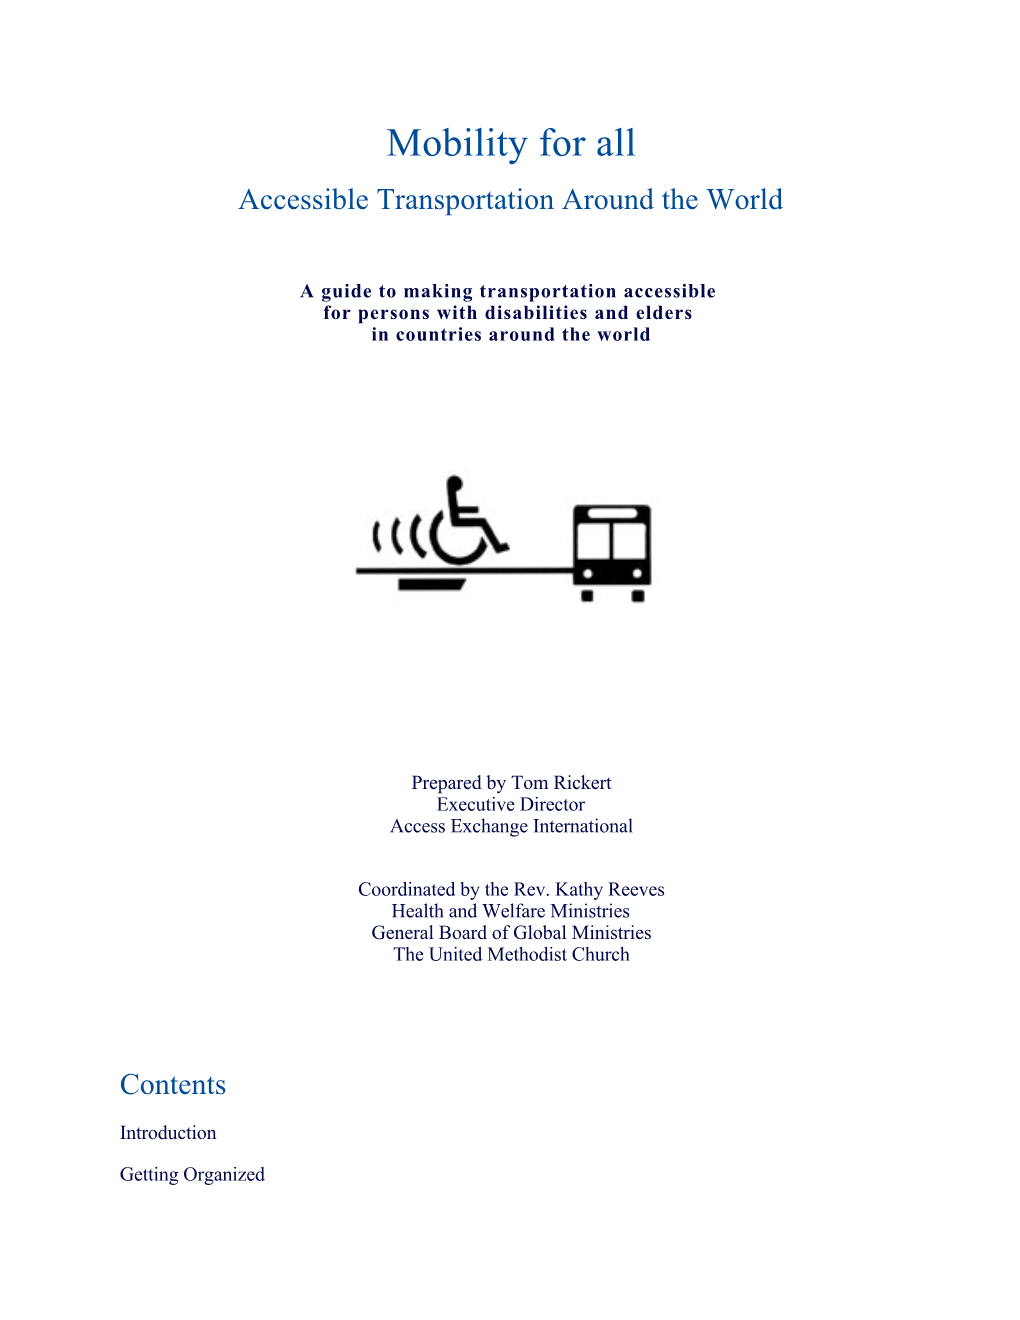 Mobility for All Accessible Transportation Around the World